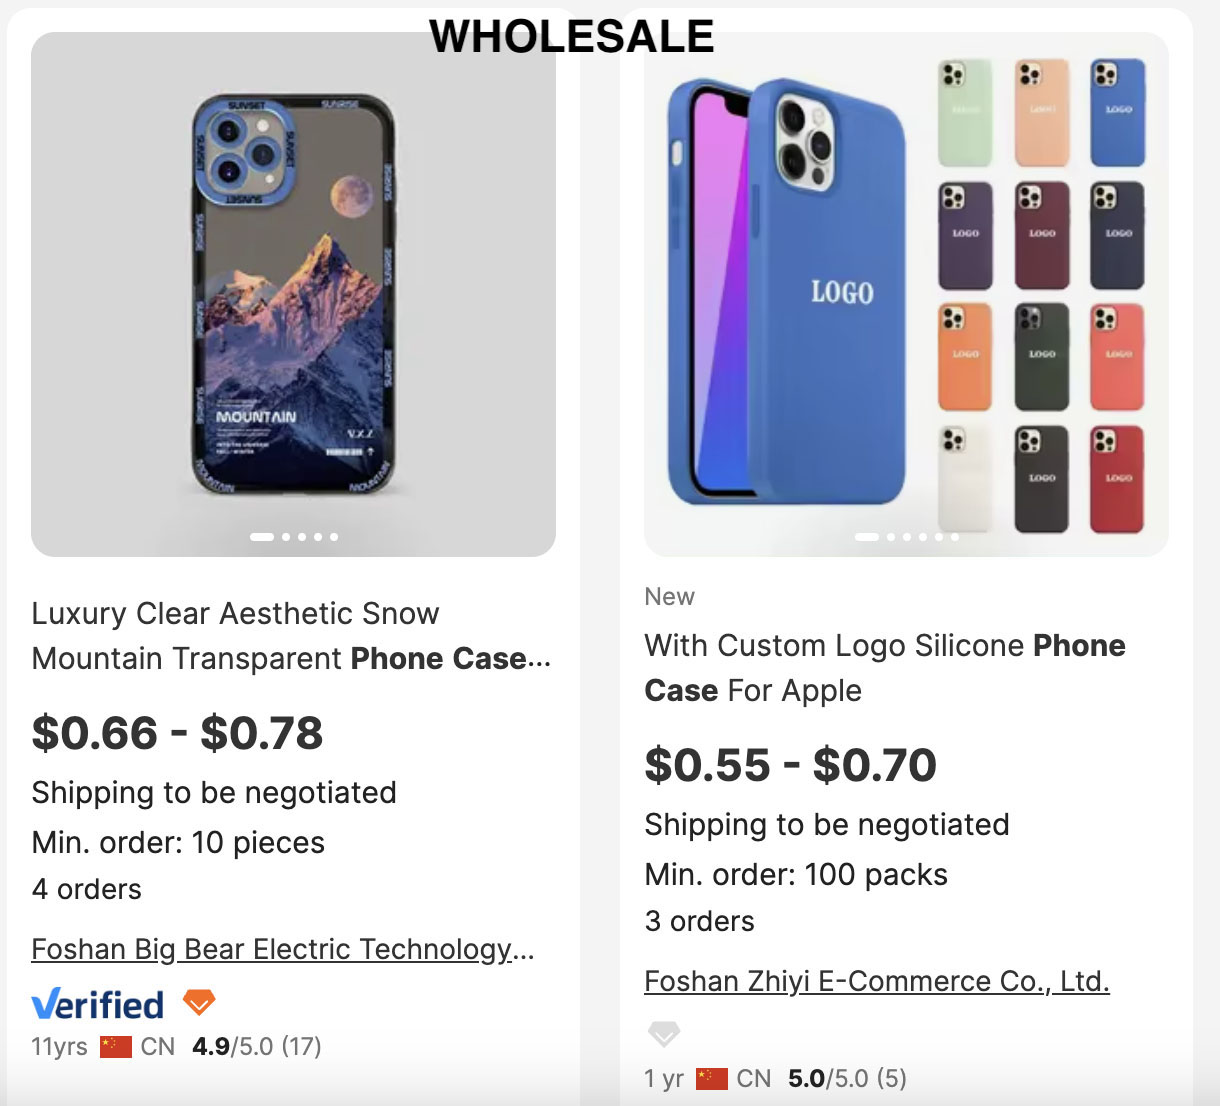 Apple iPhone cases wholesale Alibaba pricing.